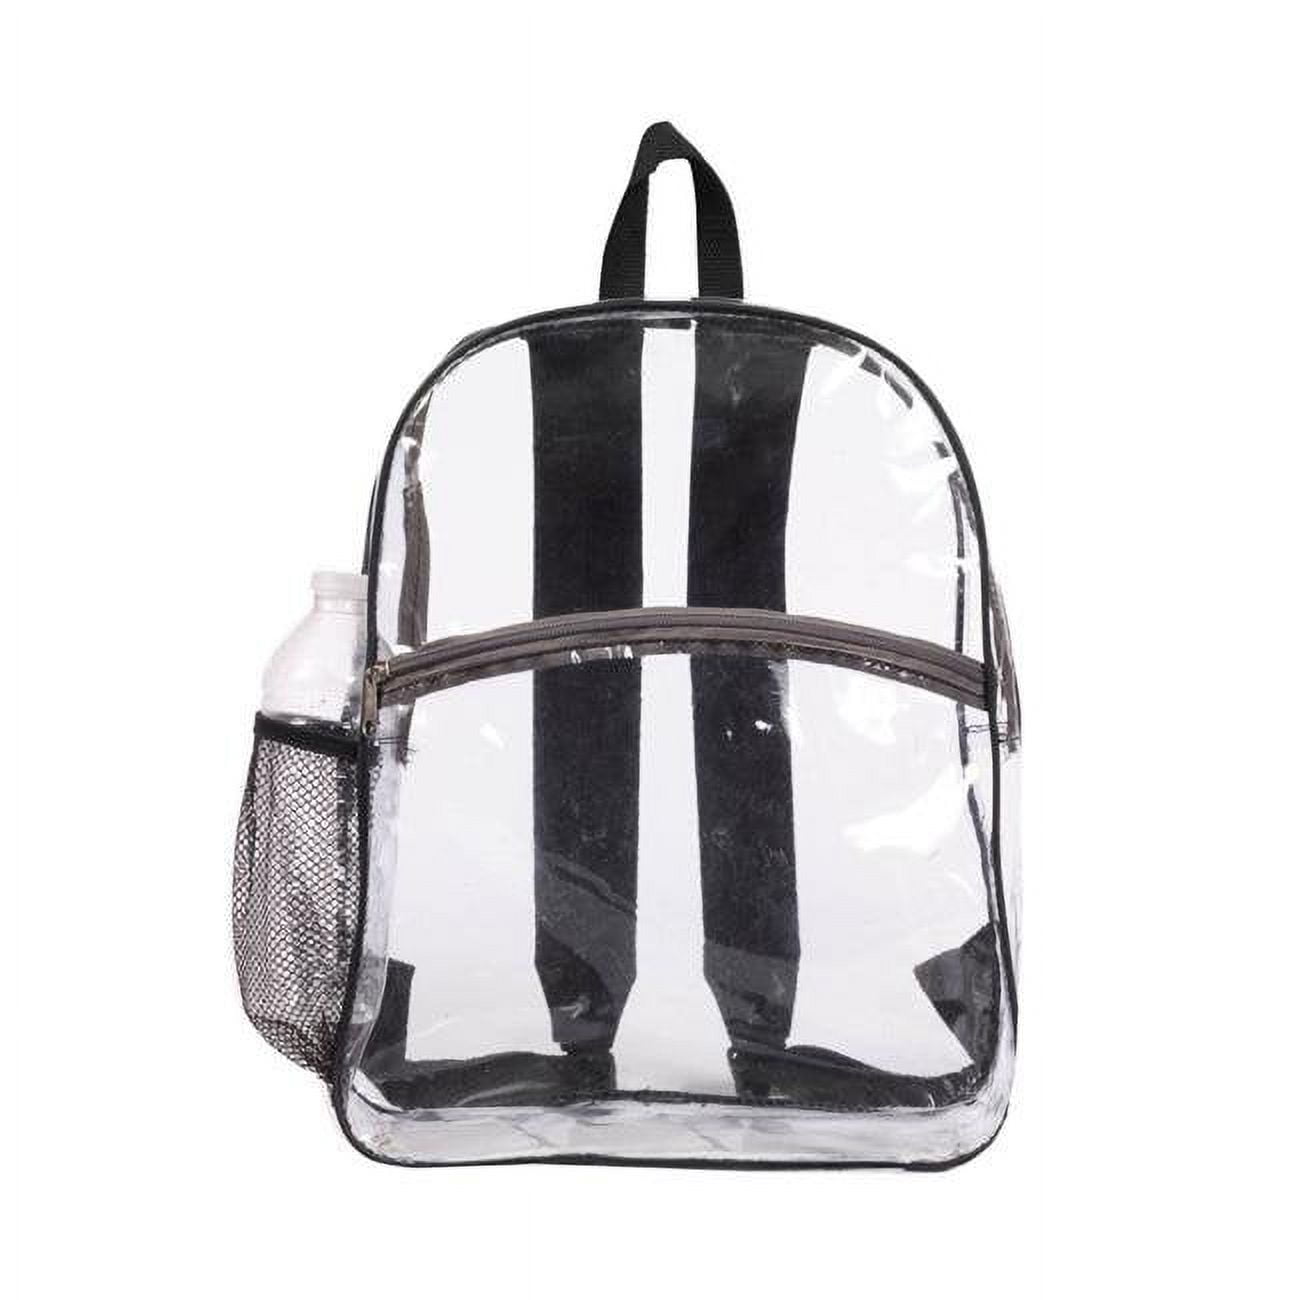 2336190 15 In. Classic Clear Backpack, Black - Case Of 25